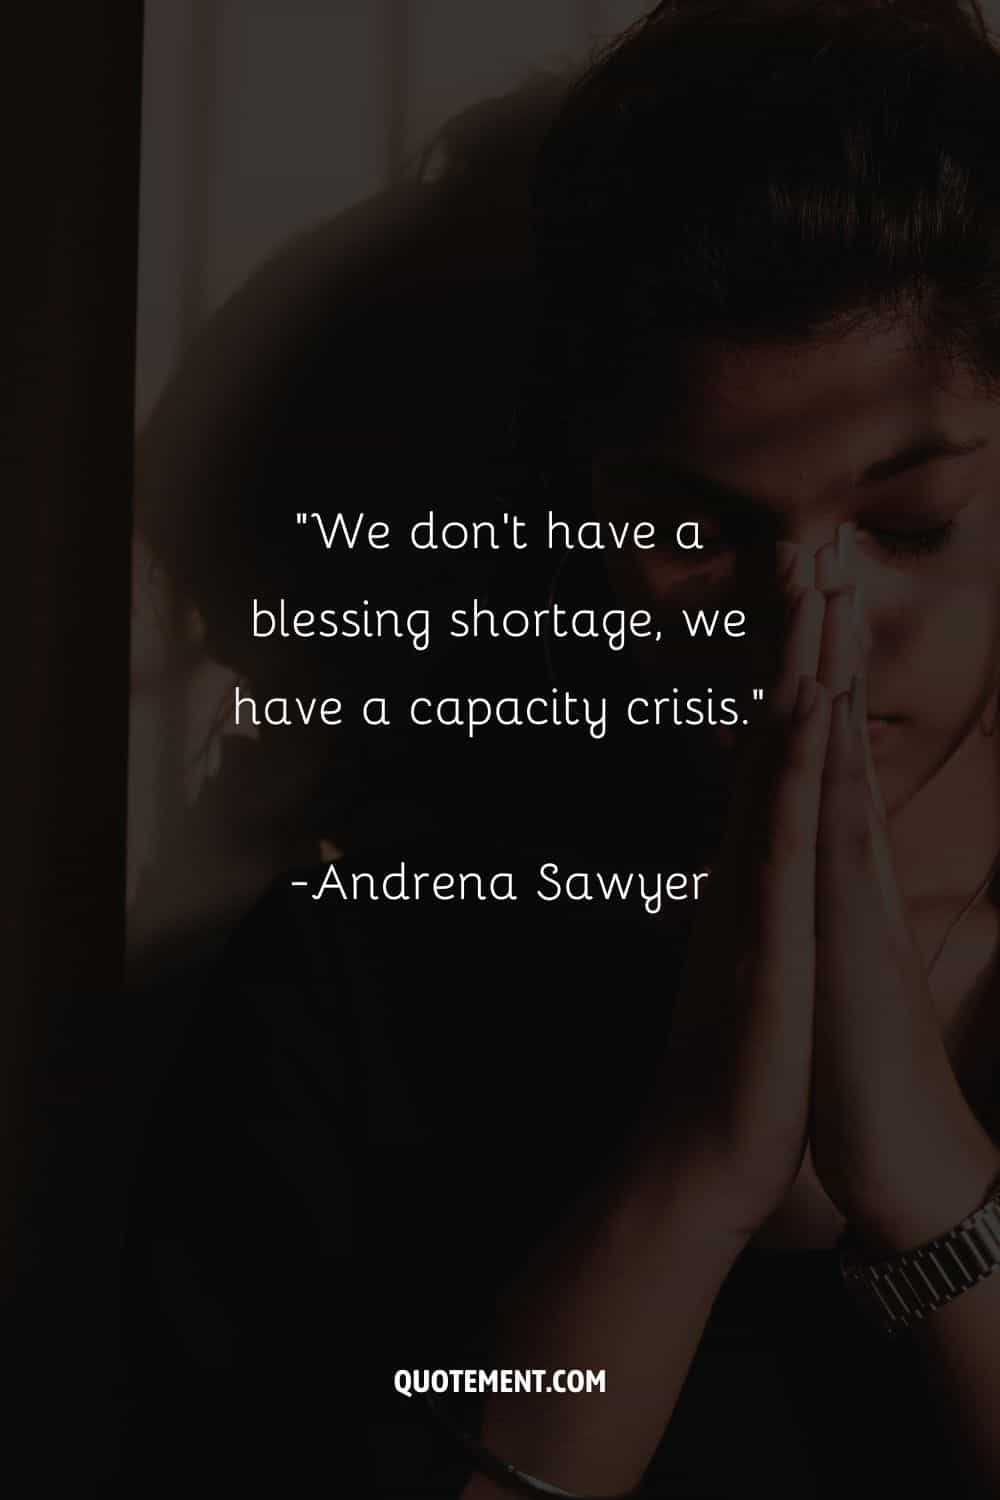 “We don't have a blessing shortage, we have a capacity crisis.”